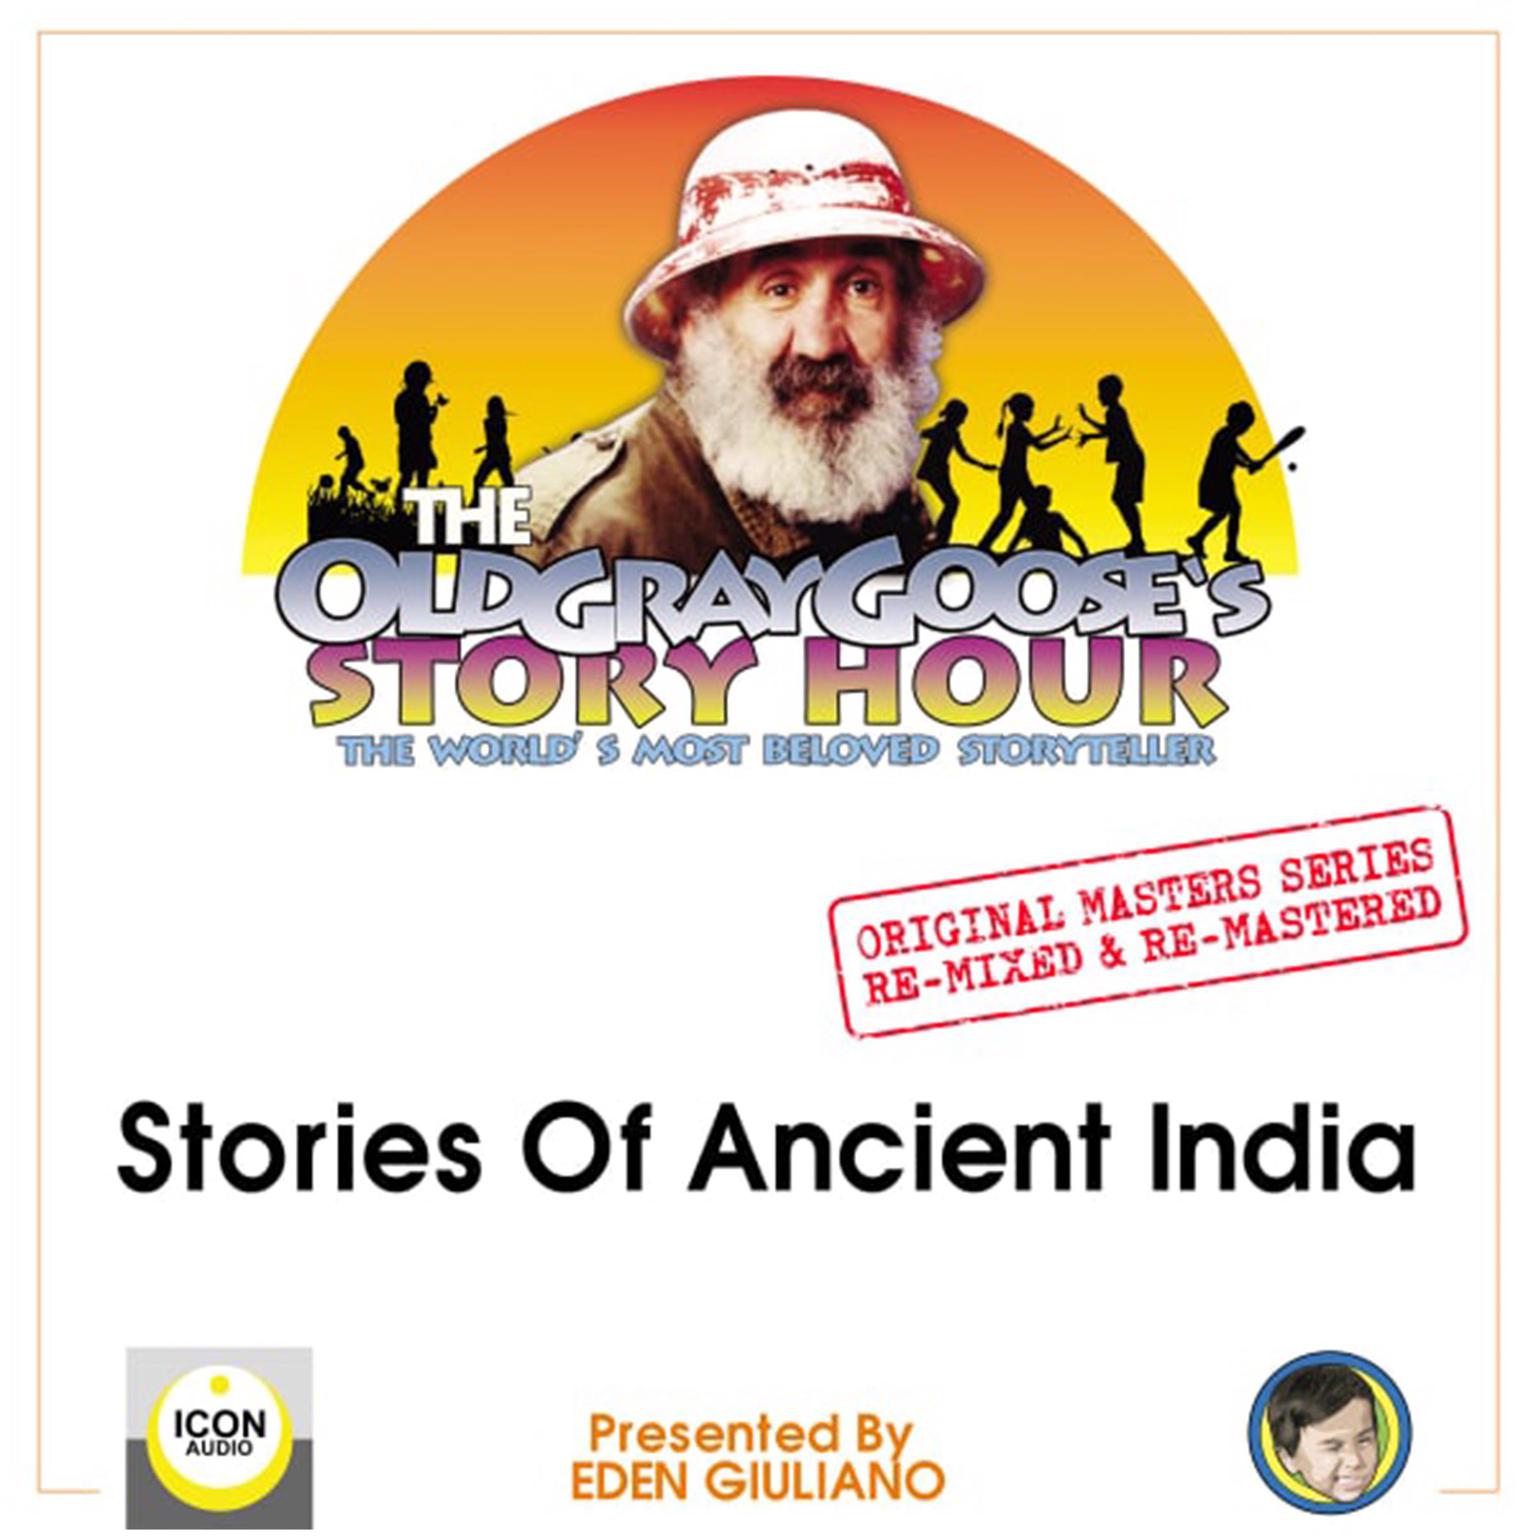 The Old Gray Gooses Story Hour, The Worlds Most Beloved Storyteller; Original Masters Series Re-mixed and Re-mastered; Stories of Ancient India Audiobook, by Eden Giuliano